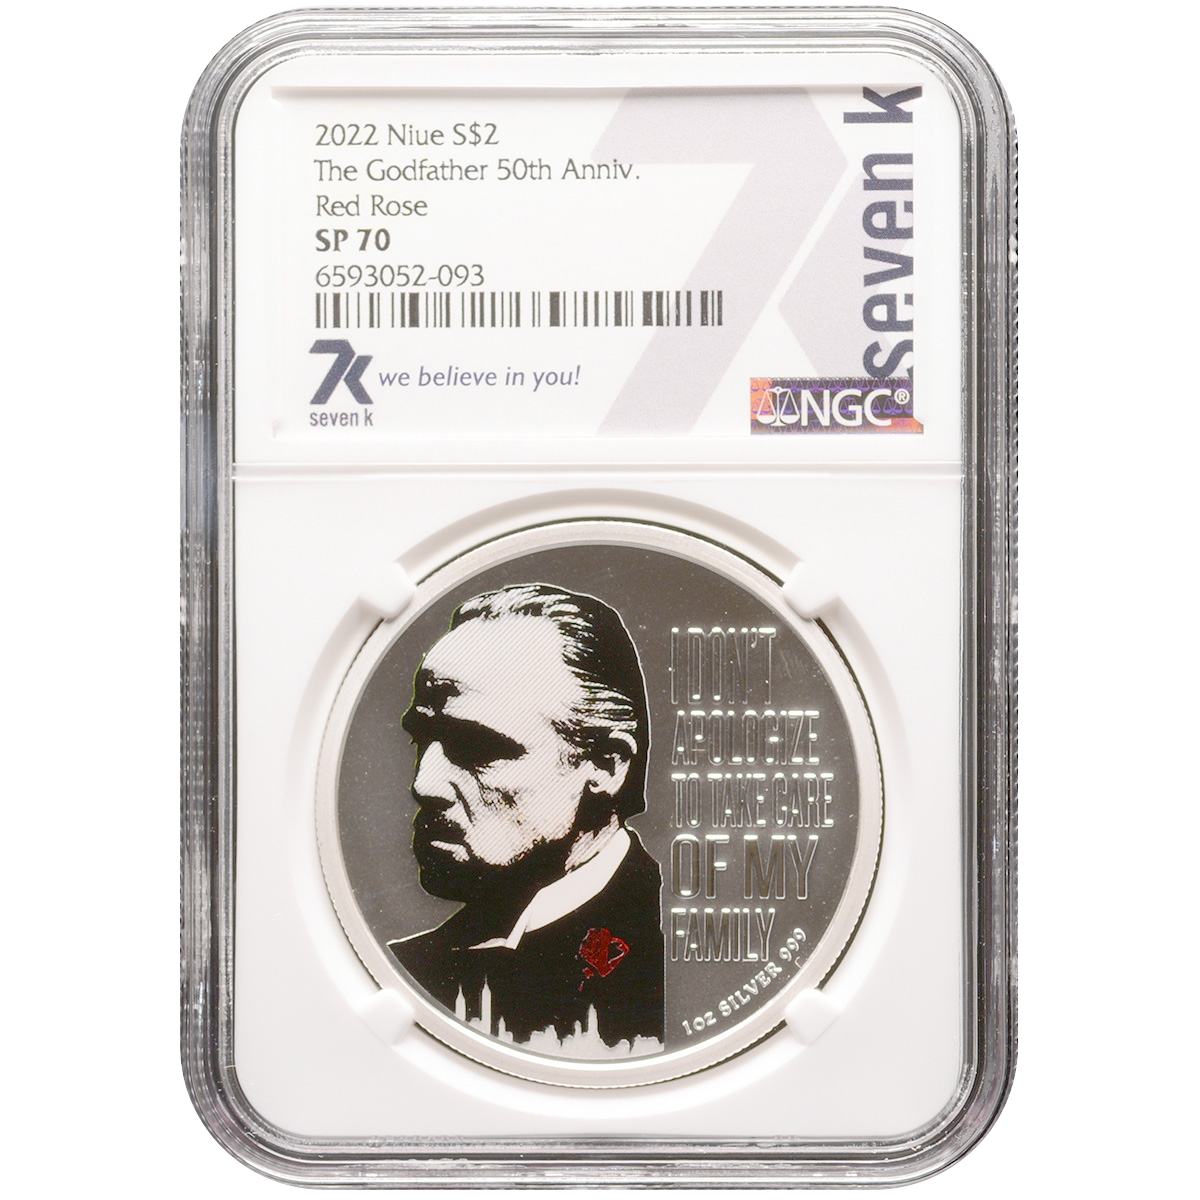 The Godfather 50th Anniversary Red Rose 1oz Silver - OZB